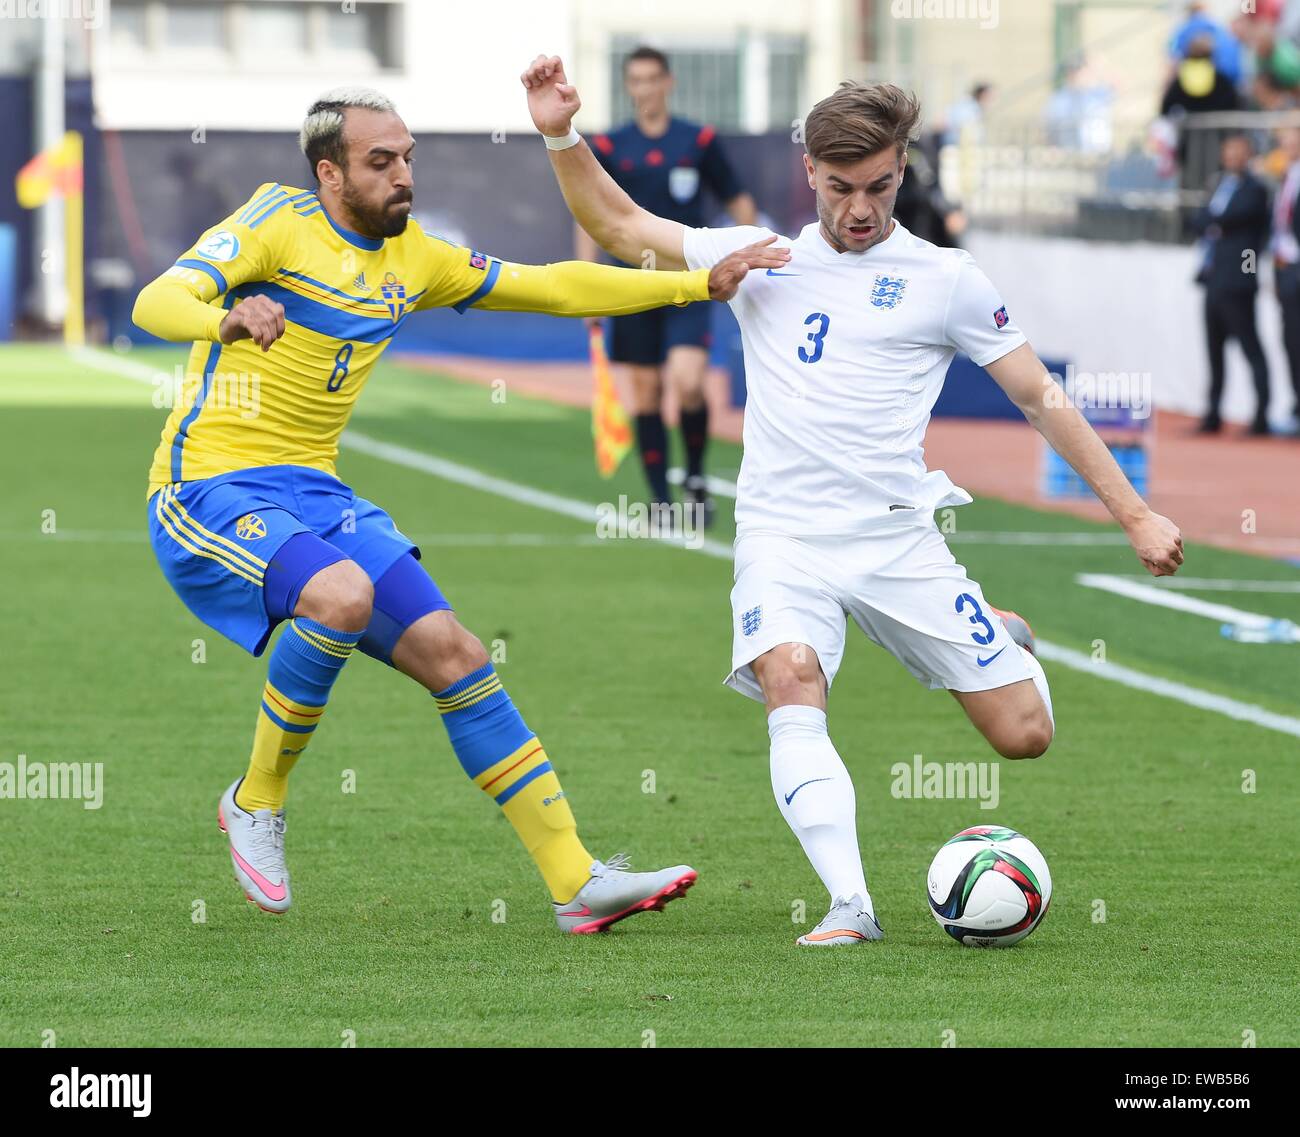 Olomouc, Czech Republic. 21st June, 2015. From left Abdullah Khalili of Sweden and Luke Garbutt of England fight for ball during the Euro U21 soccer championship group B match Sweden vs England in Olomouc, Czech Republic, June 21, 2015. Credit:  Ludek Perina/CTK Photo/Alamy Live News Stock Photo